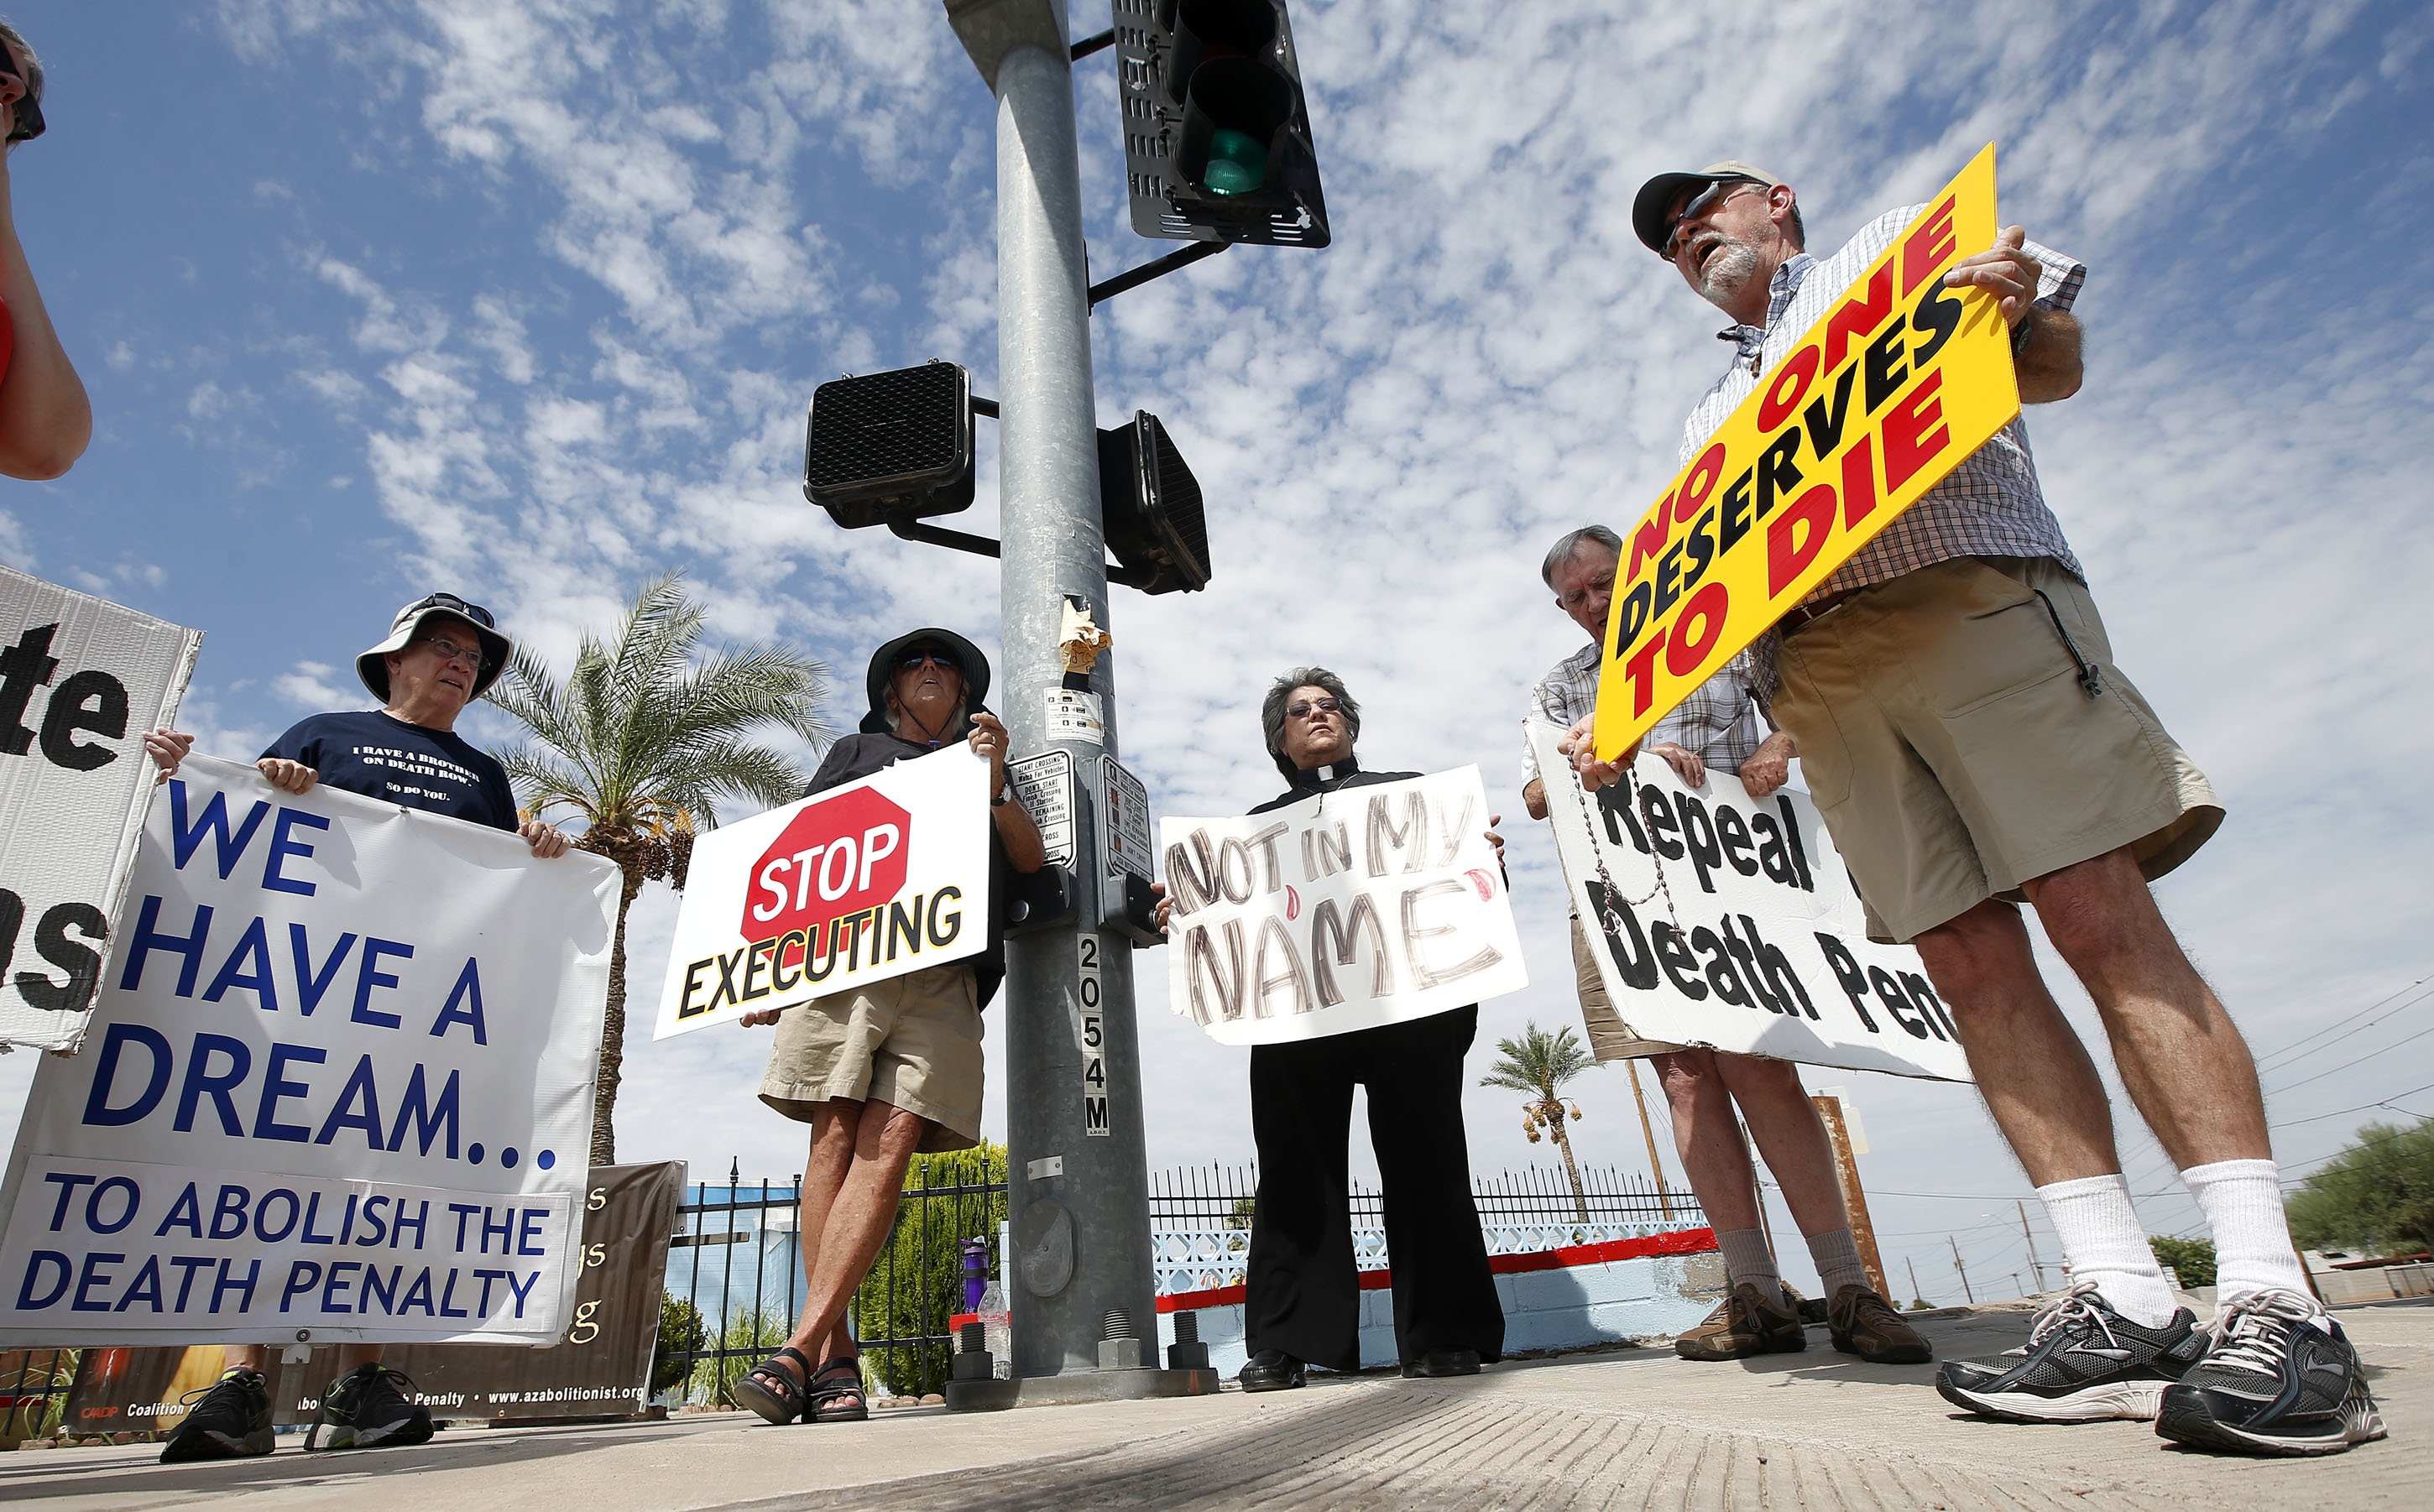 John Zemblidge, right, leads a group of about a dozen death-penalty opponents as they protest the execution of Joseph Wood at the state prison in Florence, Ariz., on July 23, 2014 (Associated Press)